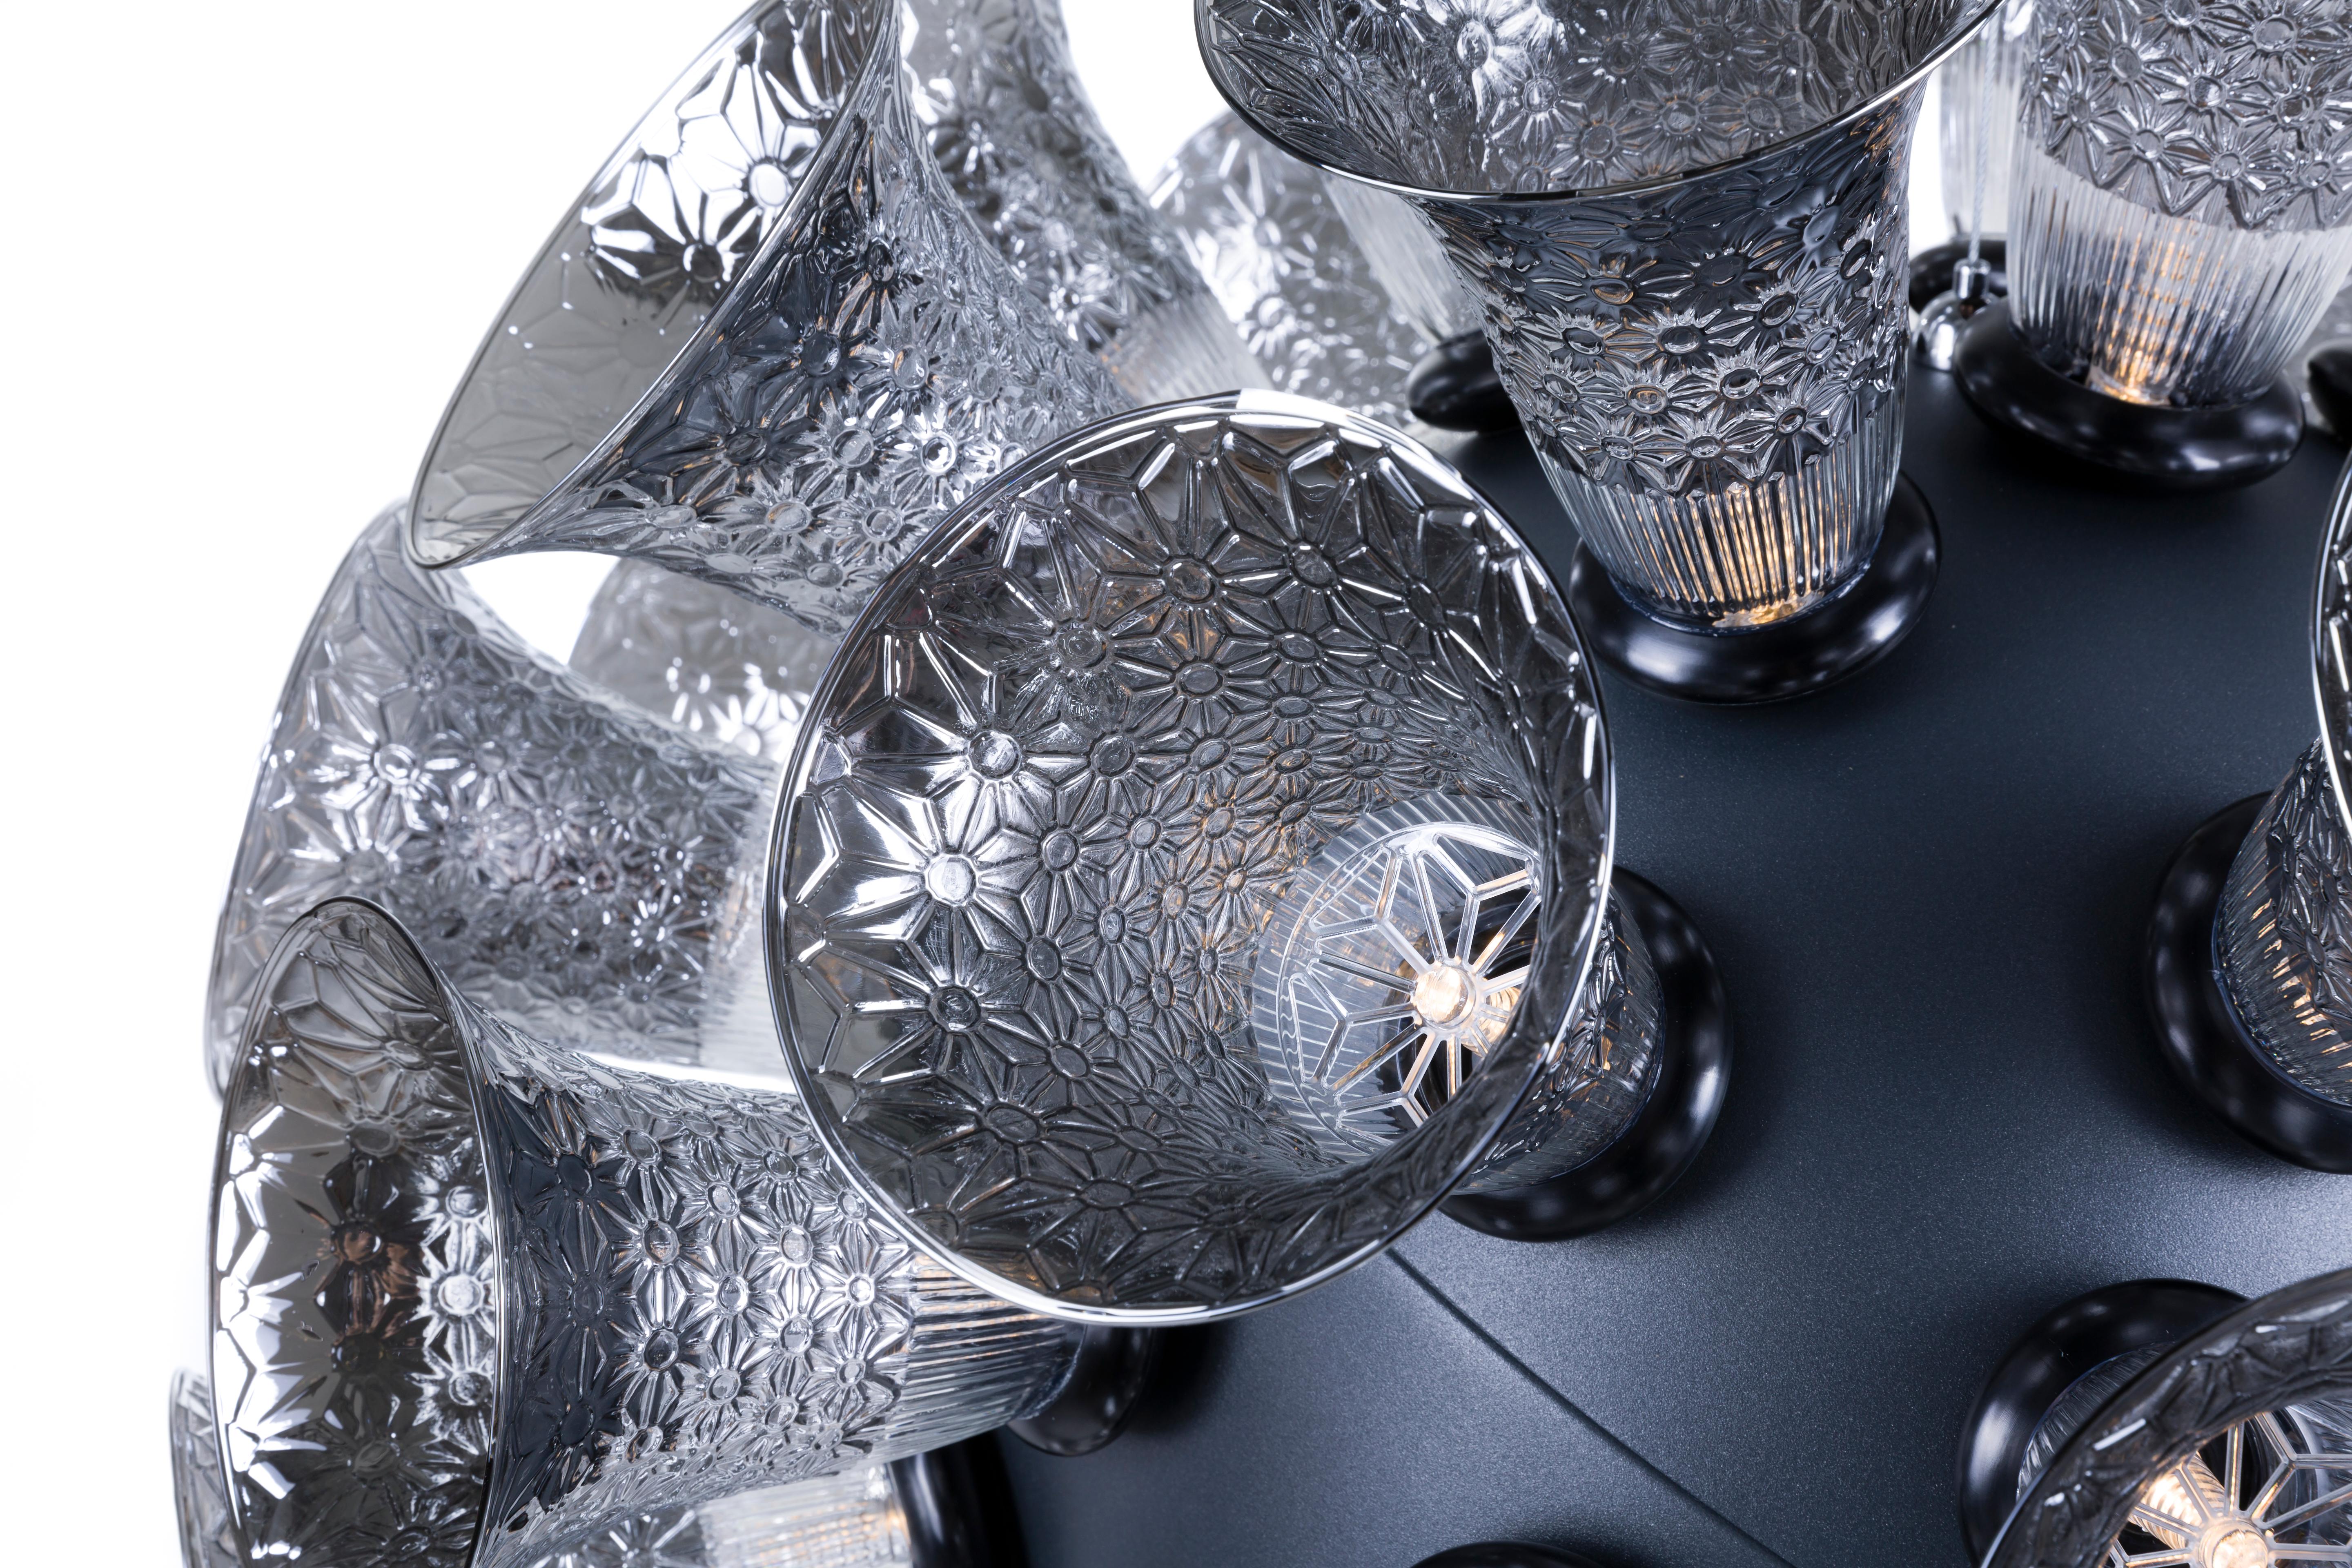 The fine crystal beauty of the Chalice lamp is enhanced by a soft metallic-grey body with black rings at the base of each translucent silver glass chalice. The result is a new bouquet of light.

The Chalice is produced with a black powder coated